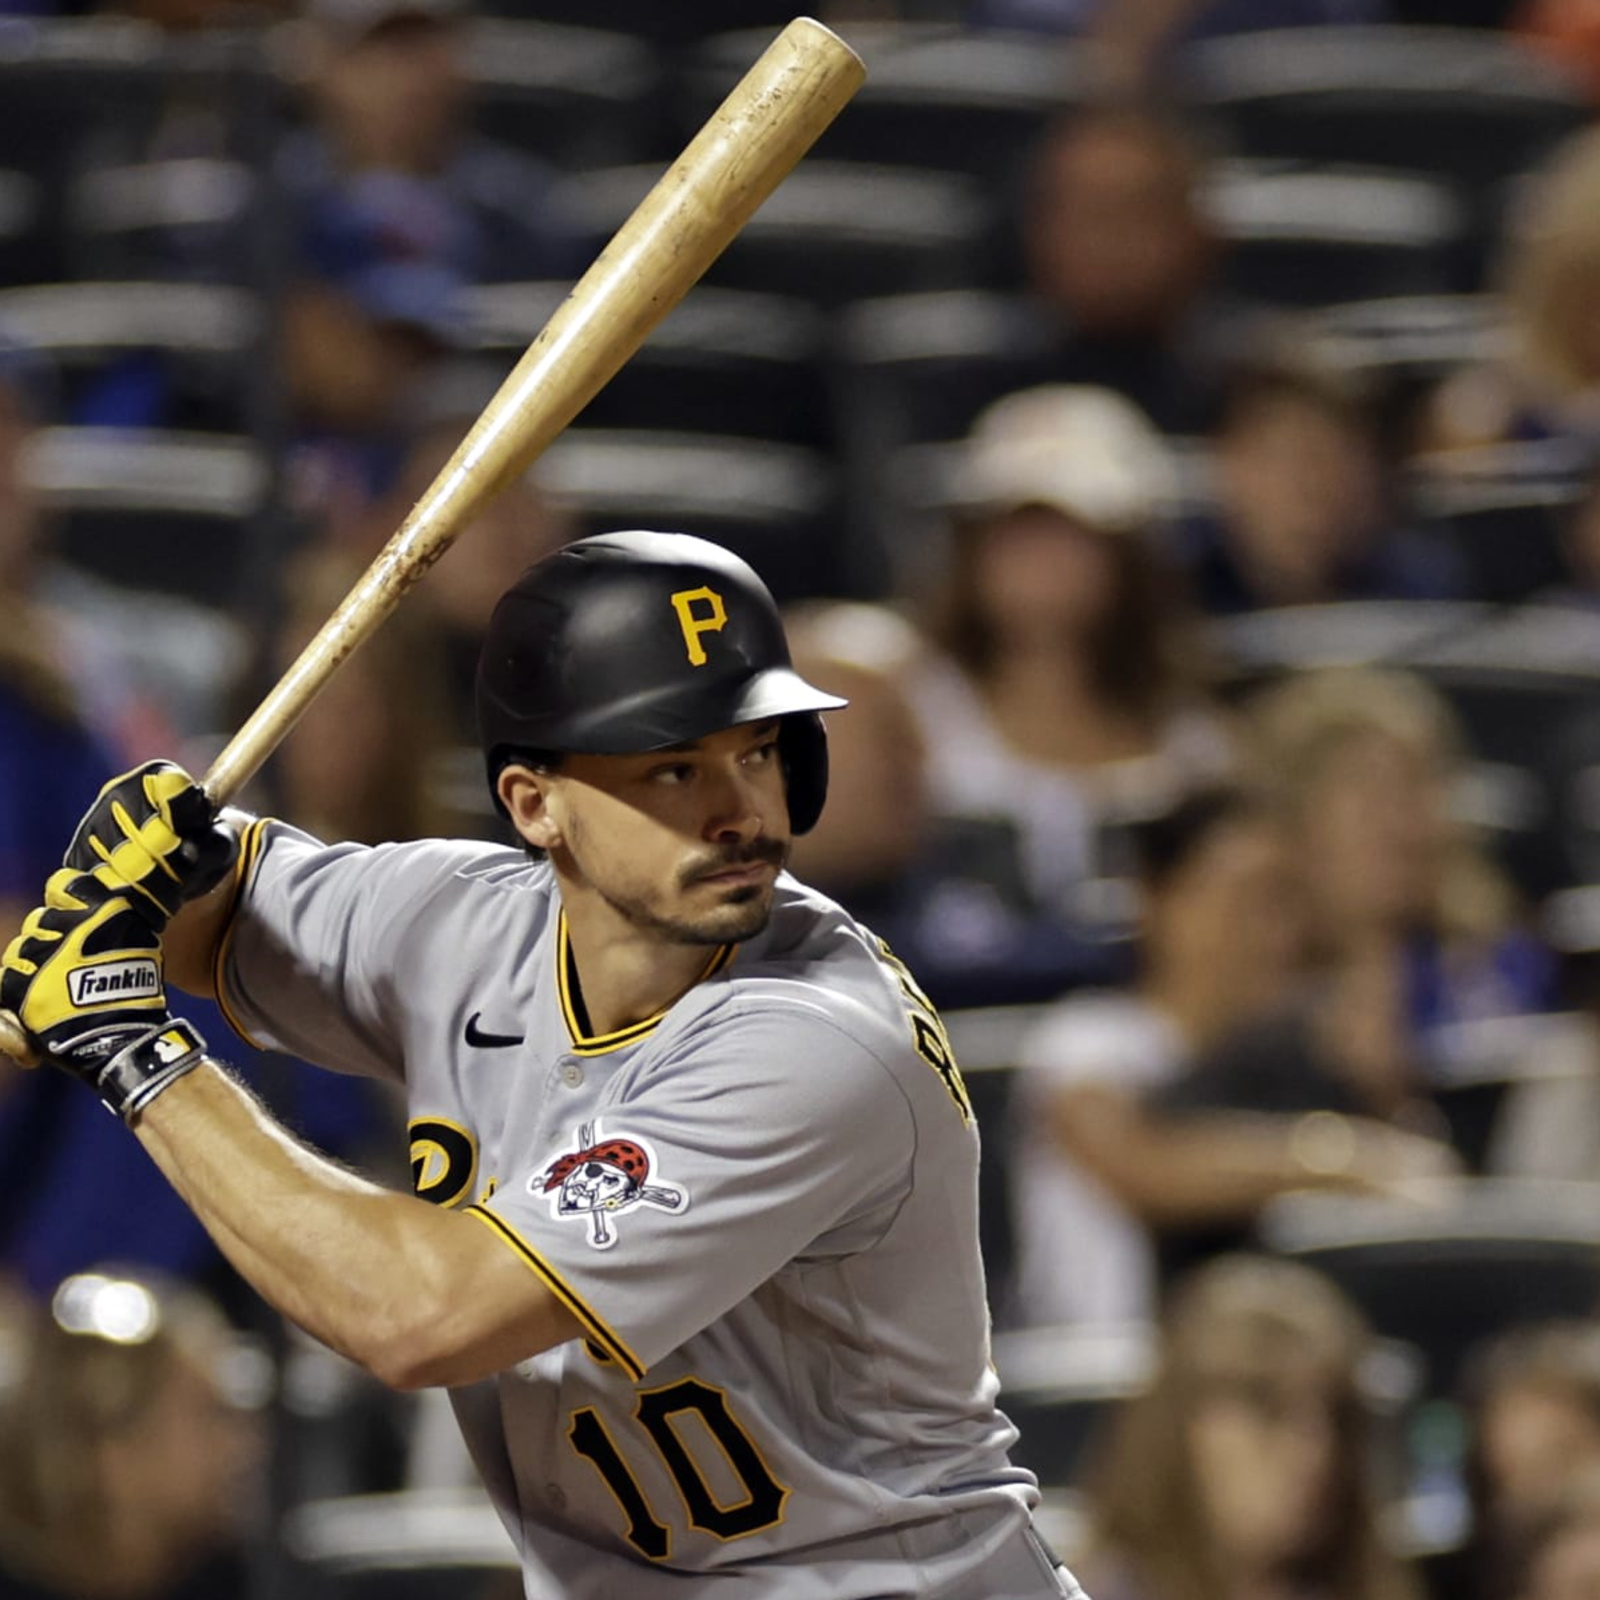 Analysis: Amid ample contract uncertainty, Bryan Reynolds continues to  produce for the Pirates